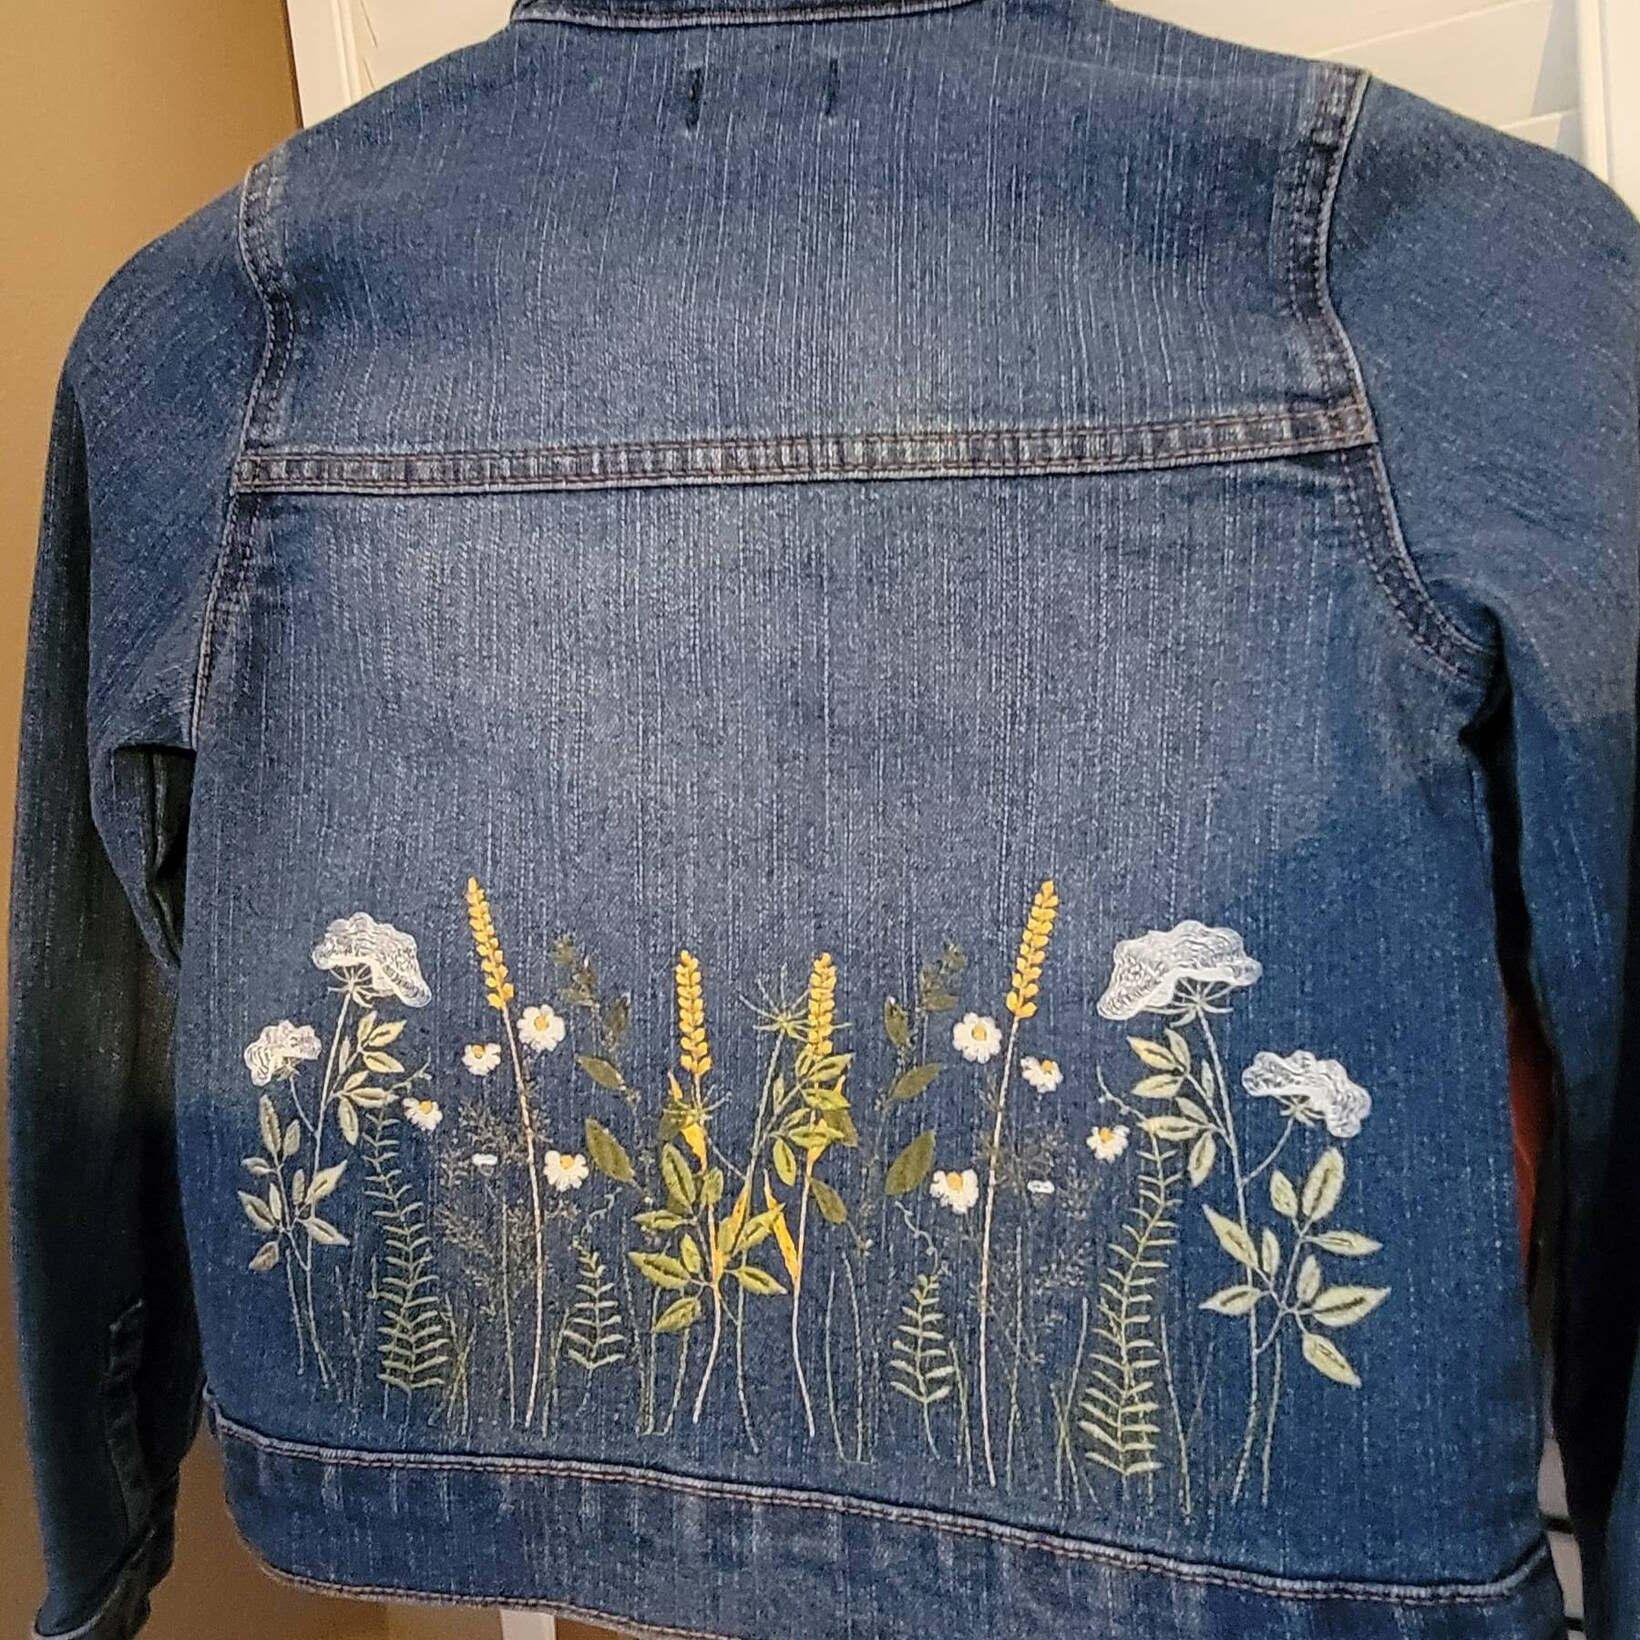 Blooms of Elegance: Denim Clothes with Flowers Embroidery Design